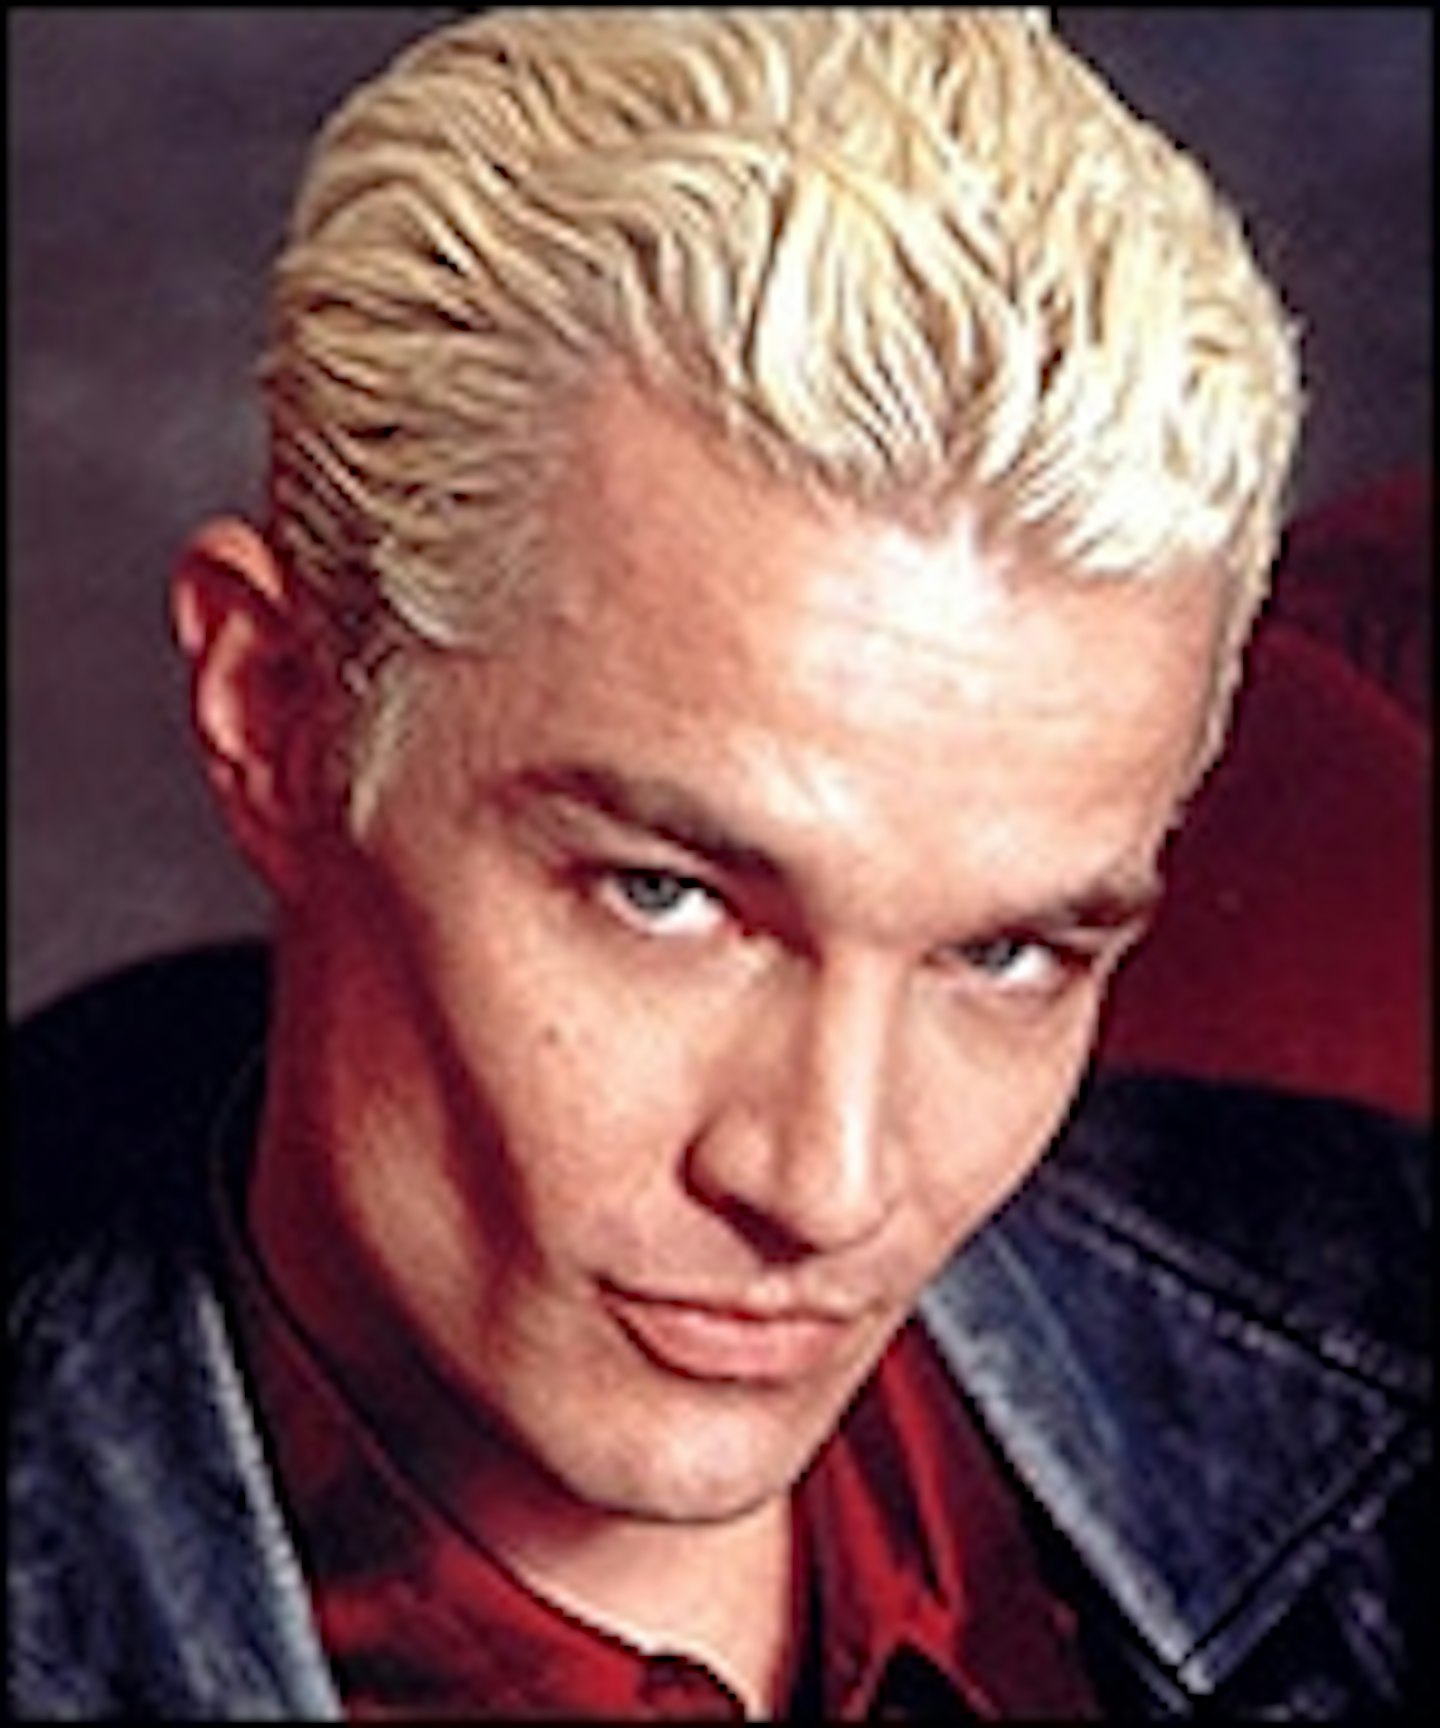 James Marsters Joins P.S., I Love You